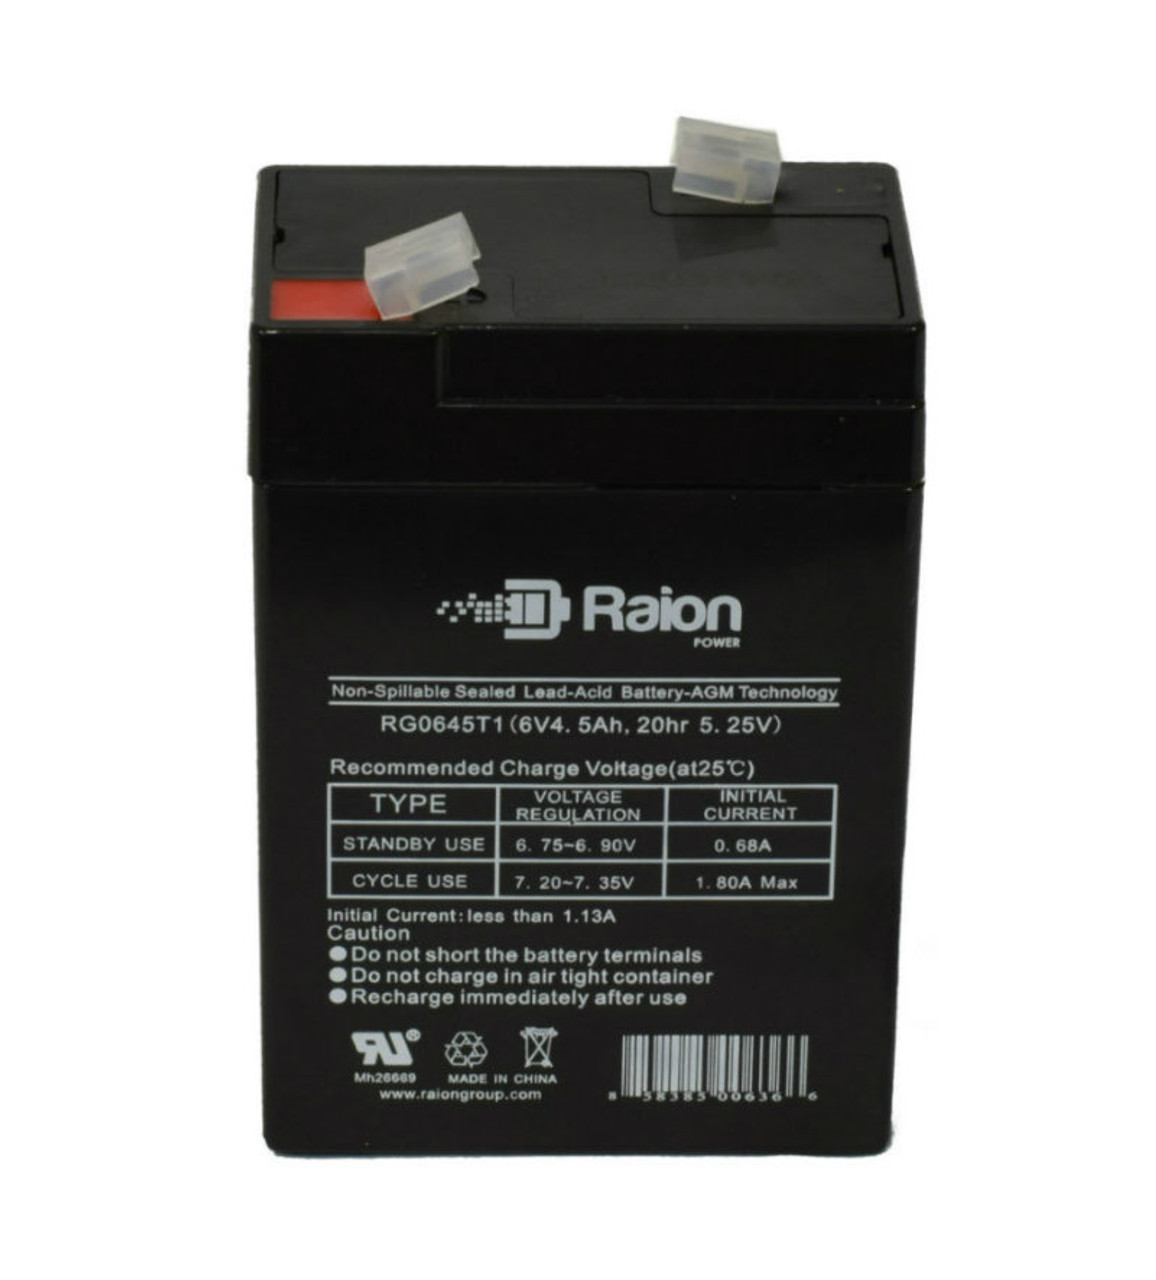 Raion Power RG0645T1 Replacement Battery Cartridge for Leadhoo NP4.0-6